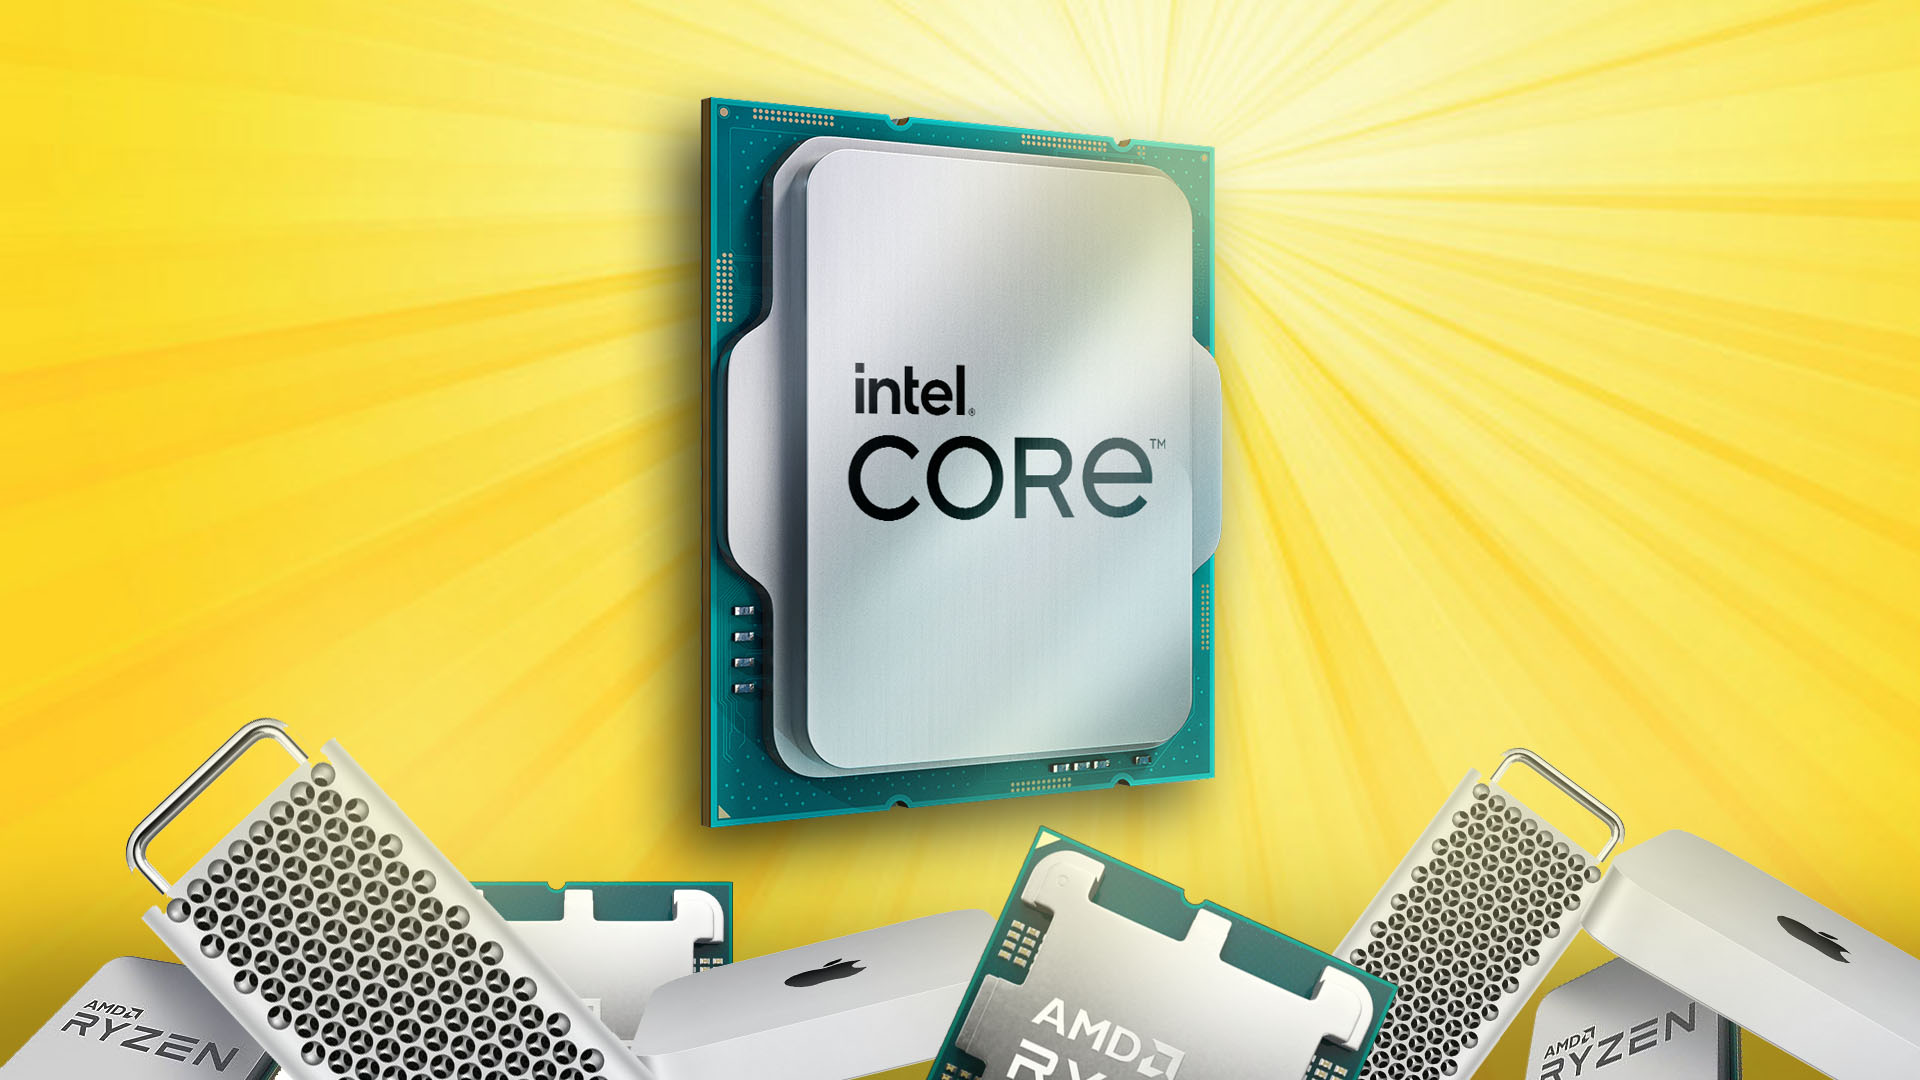 Intel CPU sales dwarf those of AMD and Apple combined